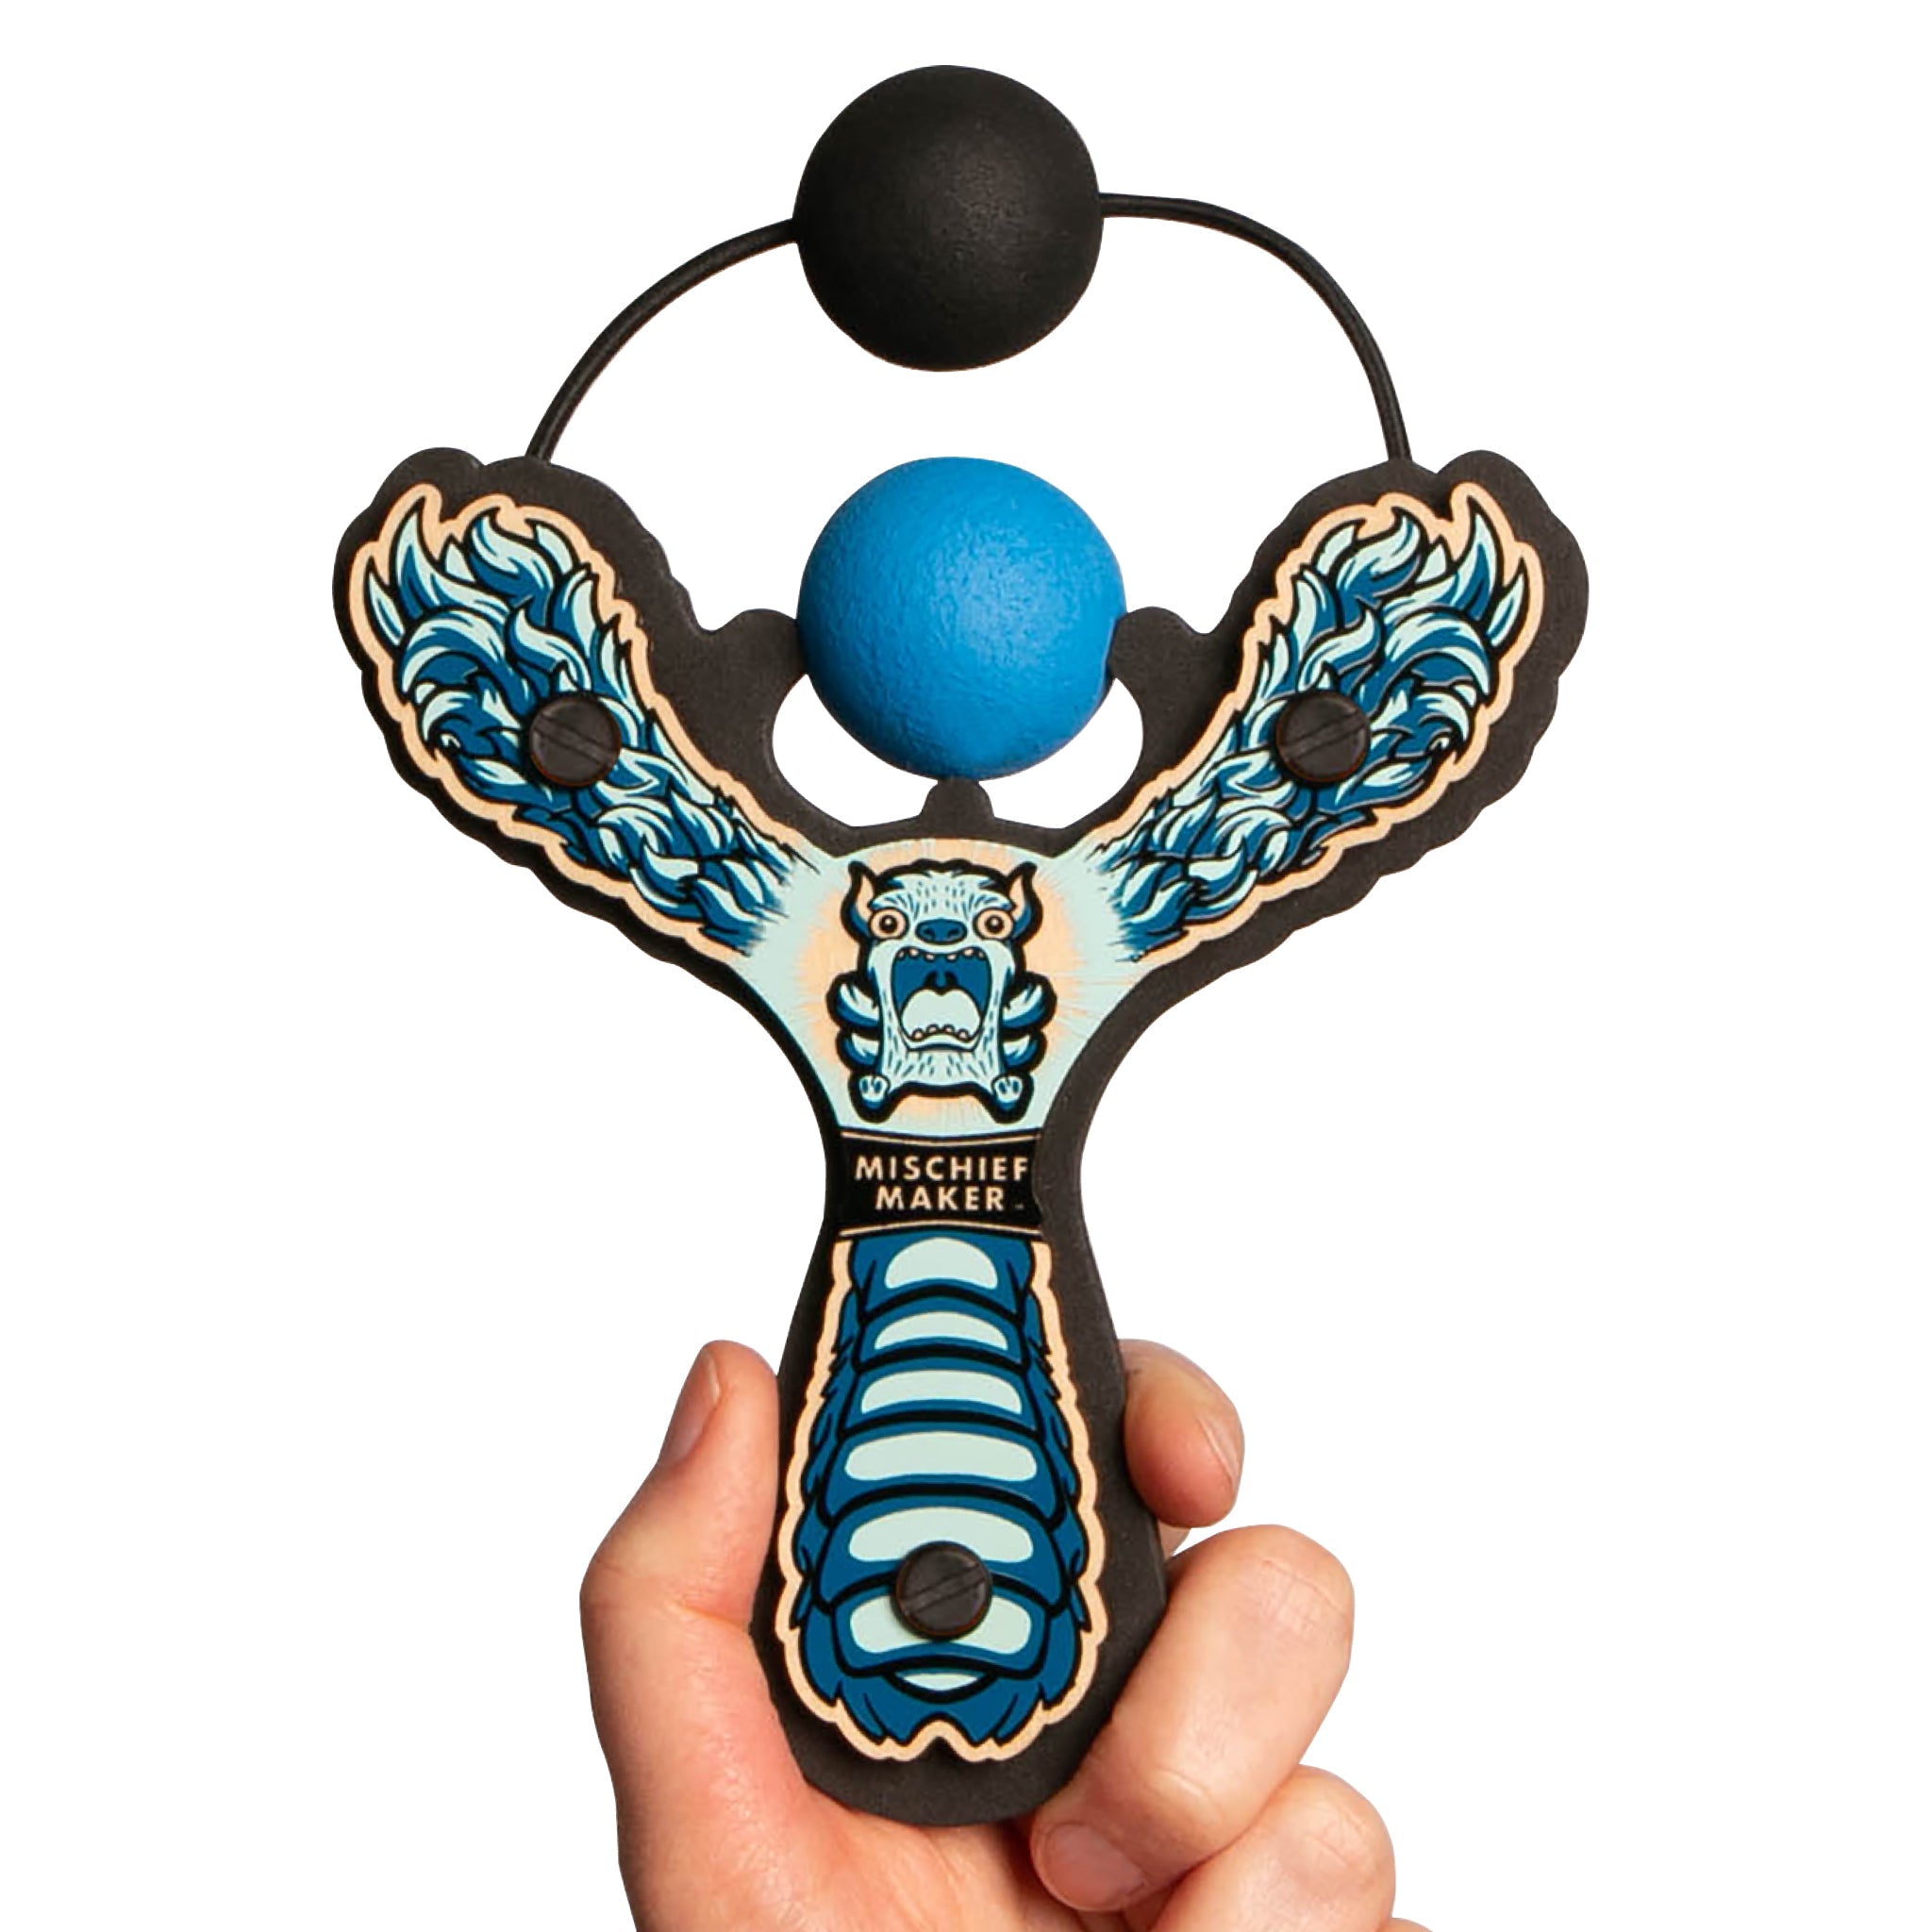 Blue Monster toy slingshot hand held with ball foam ball. Mischief Maker by Mighty Fun!